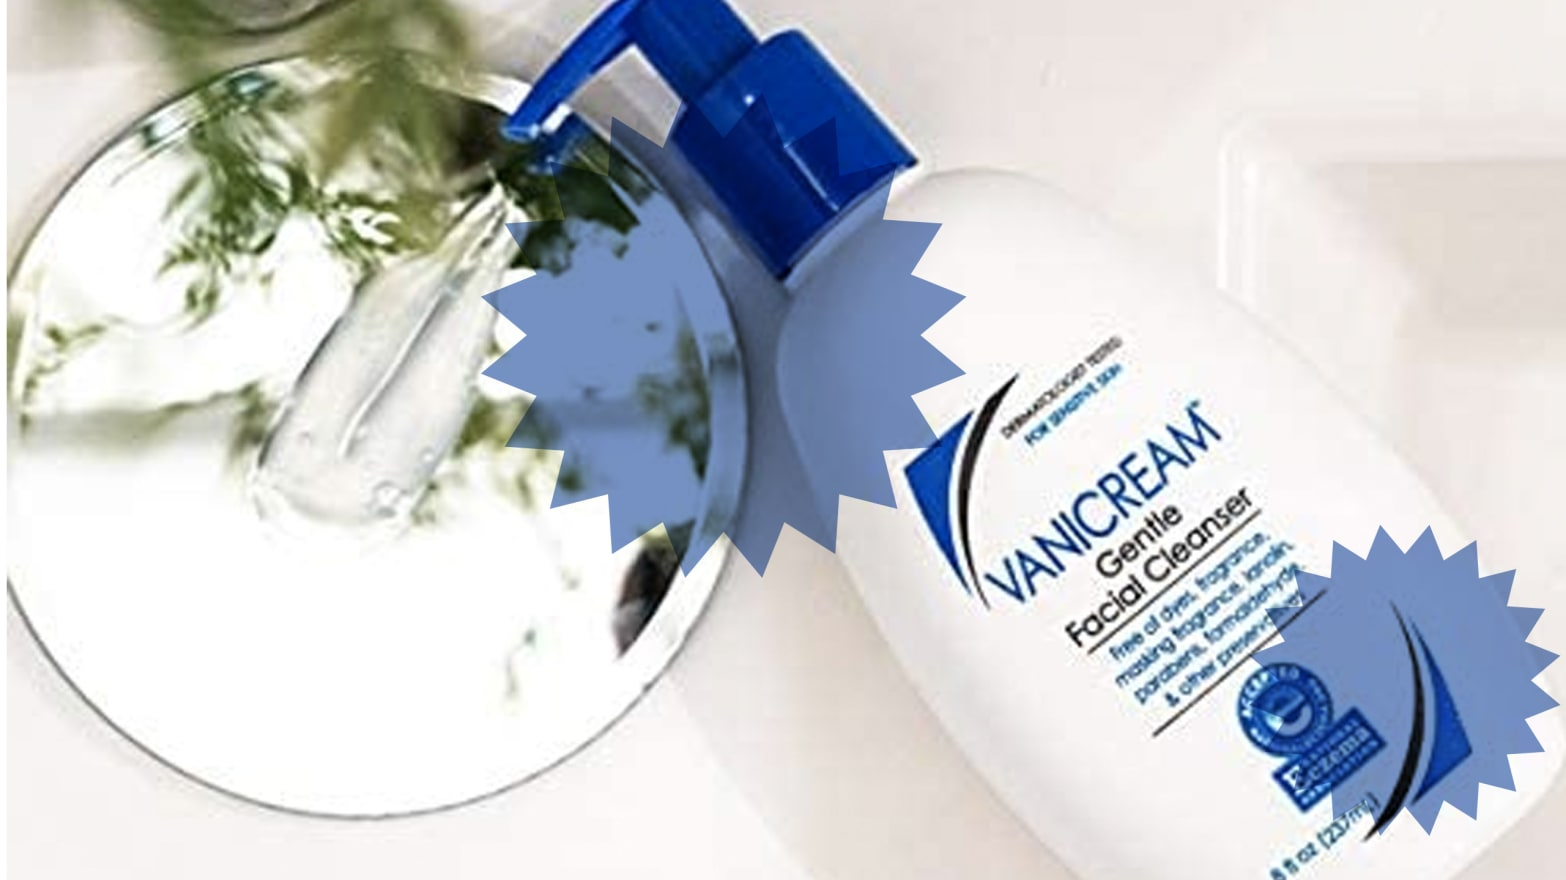 Vanicream face wash: Price, Ingredients, Benefits, Oily Skin, Review?